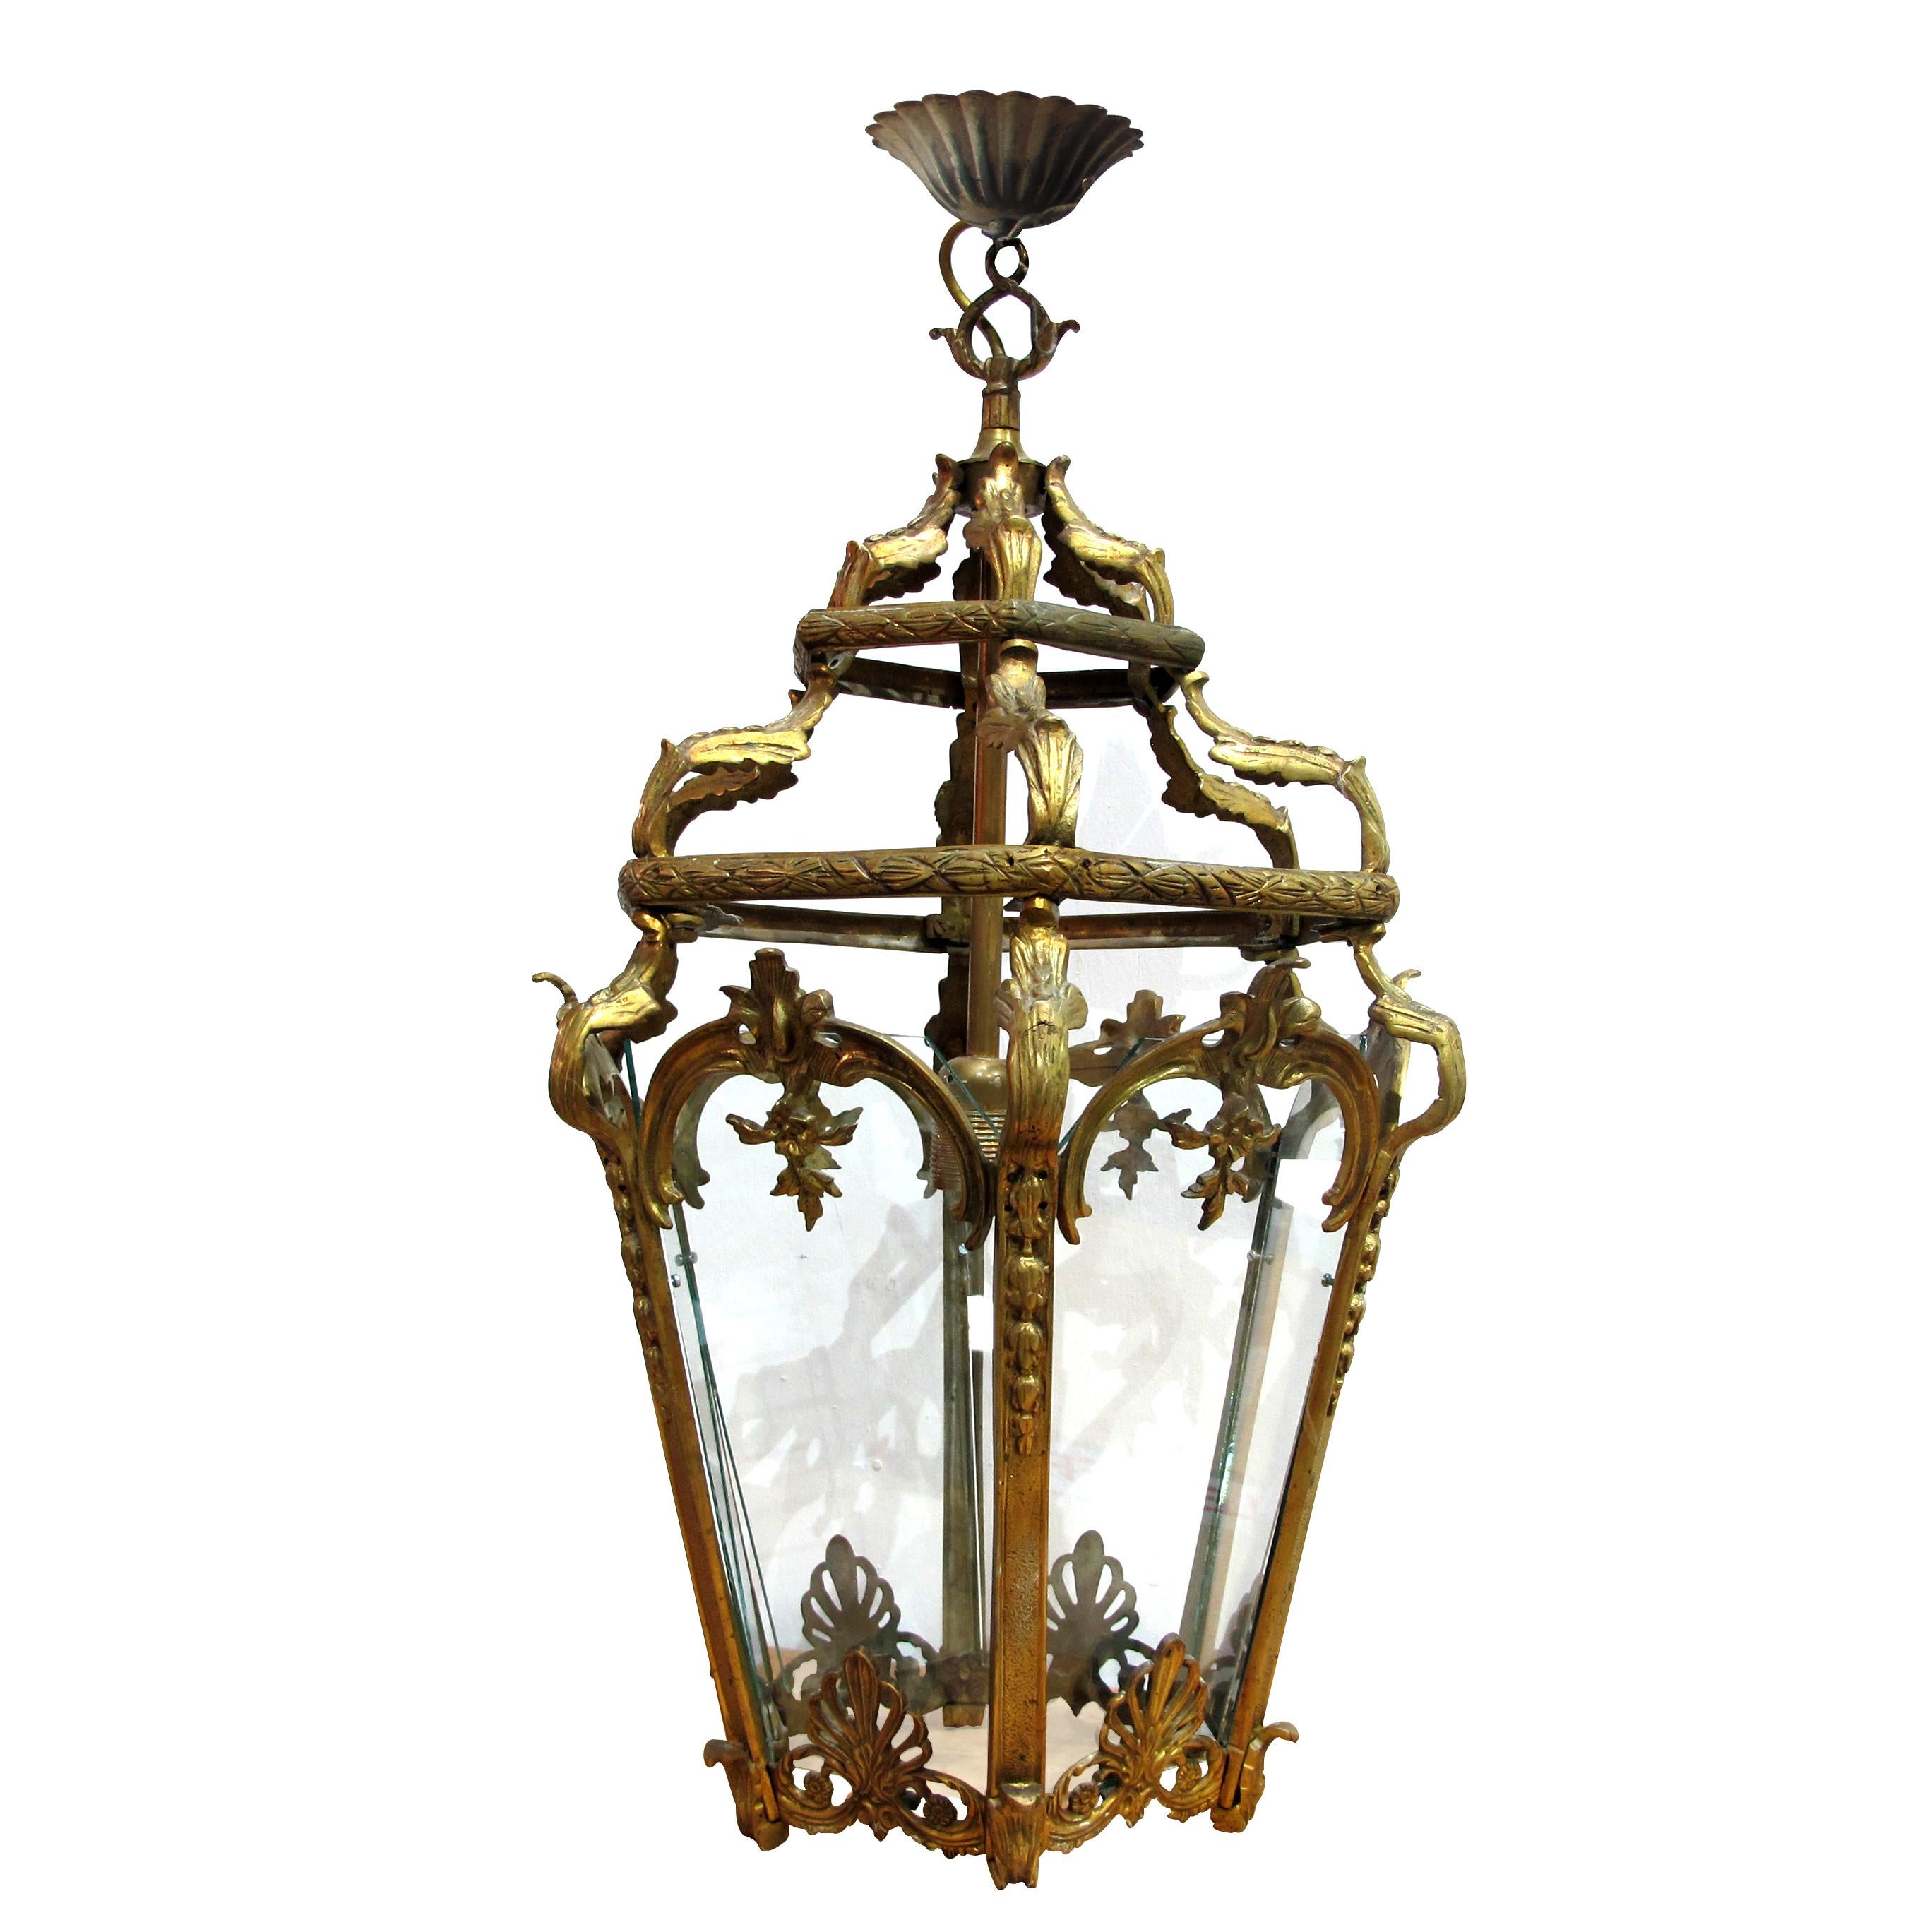 This splendid mid-century lantern pays homage to the Louis XV era, a period celebrated for its ornate design and lavish aesthetics. With its graceful curves, intricate detailing, and a nod to rococo extravagance, it captures the essence of